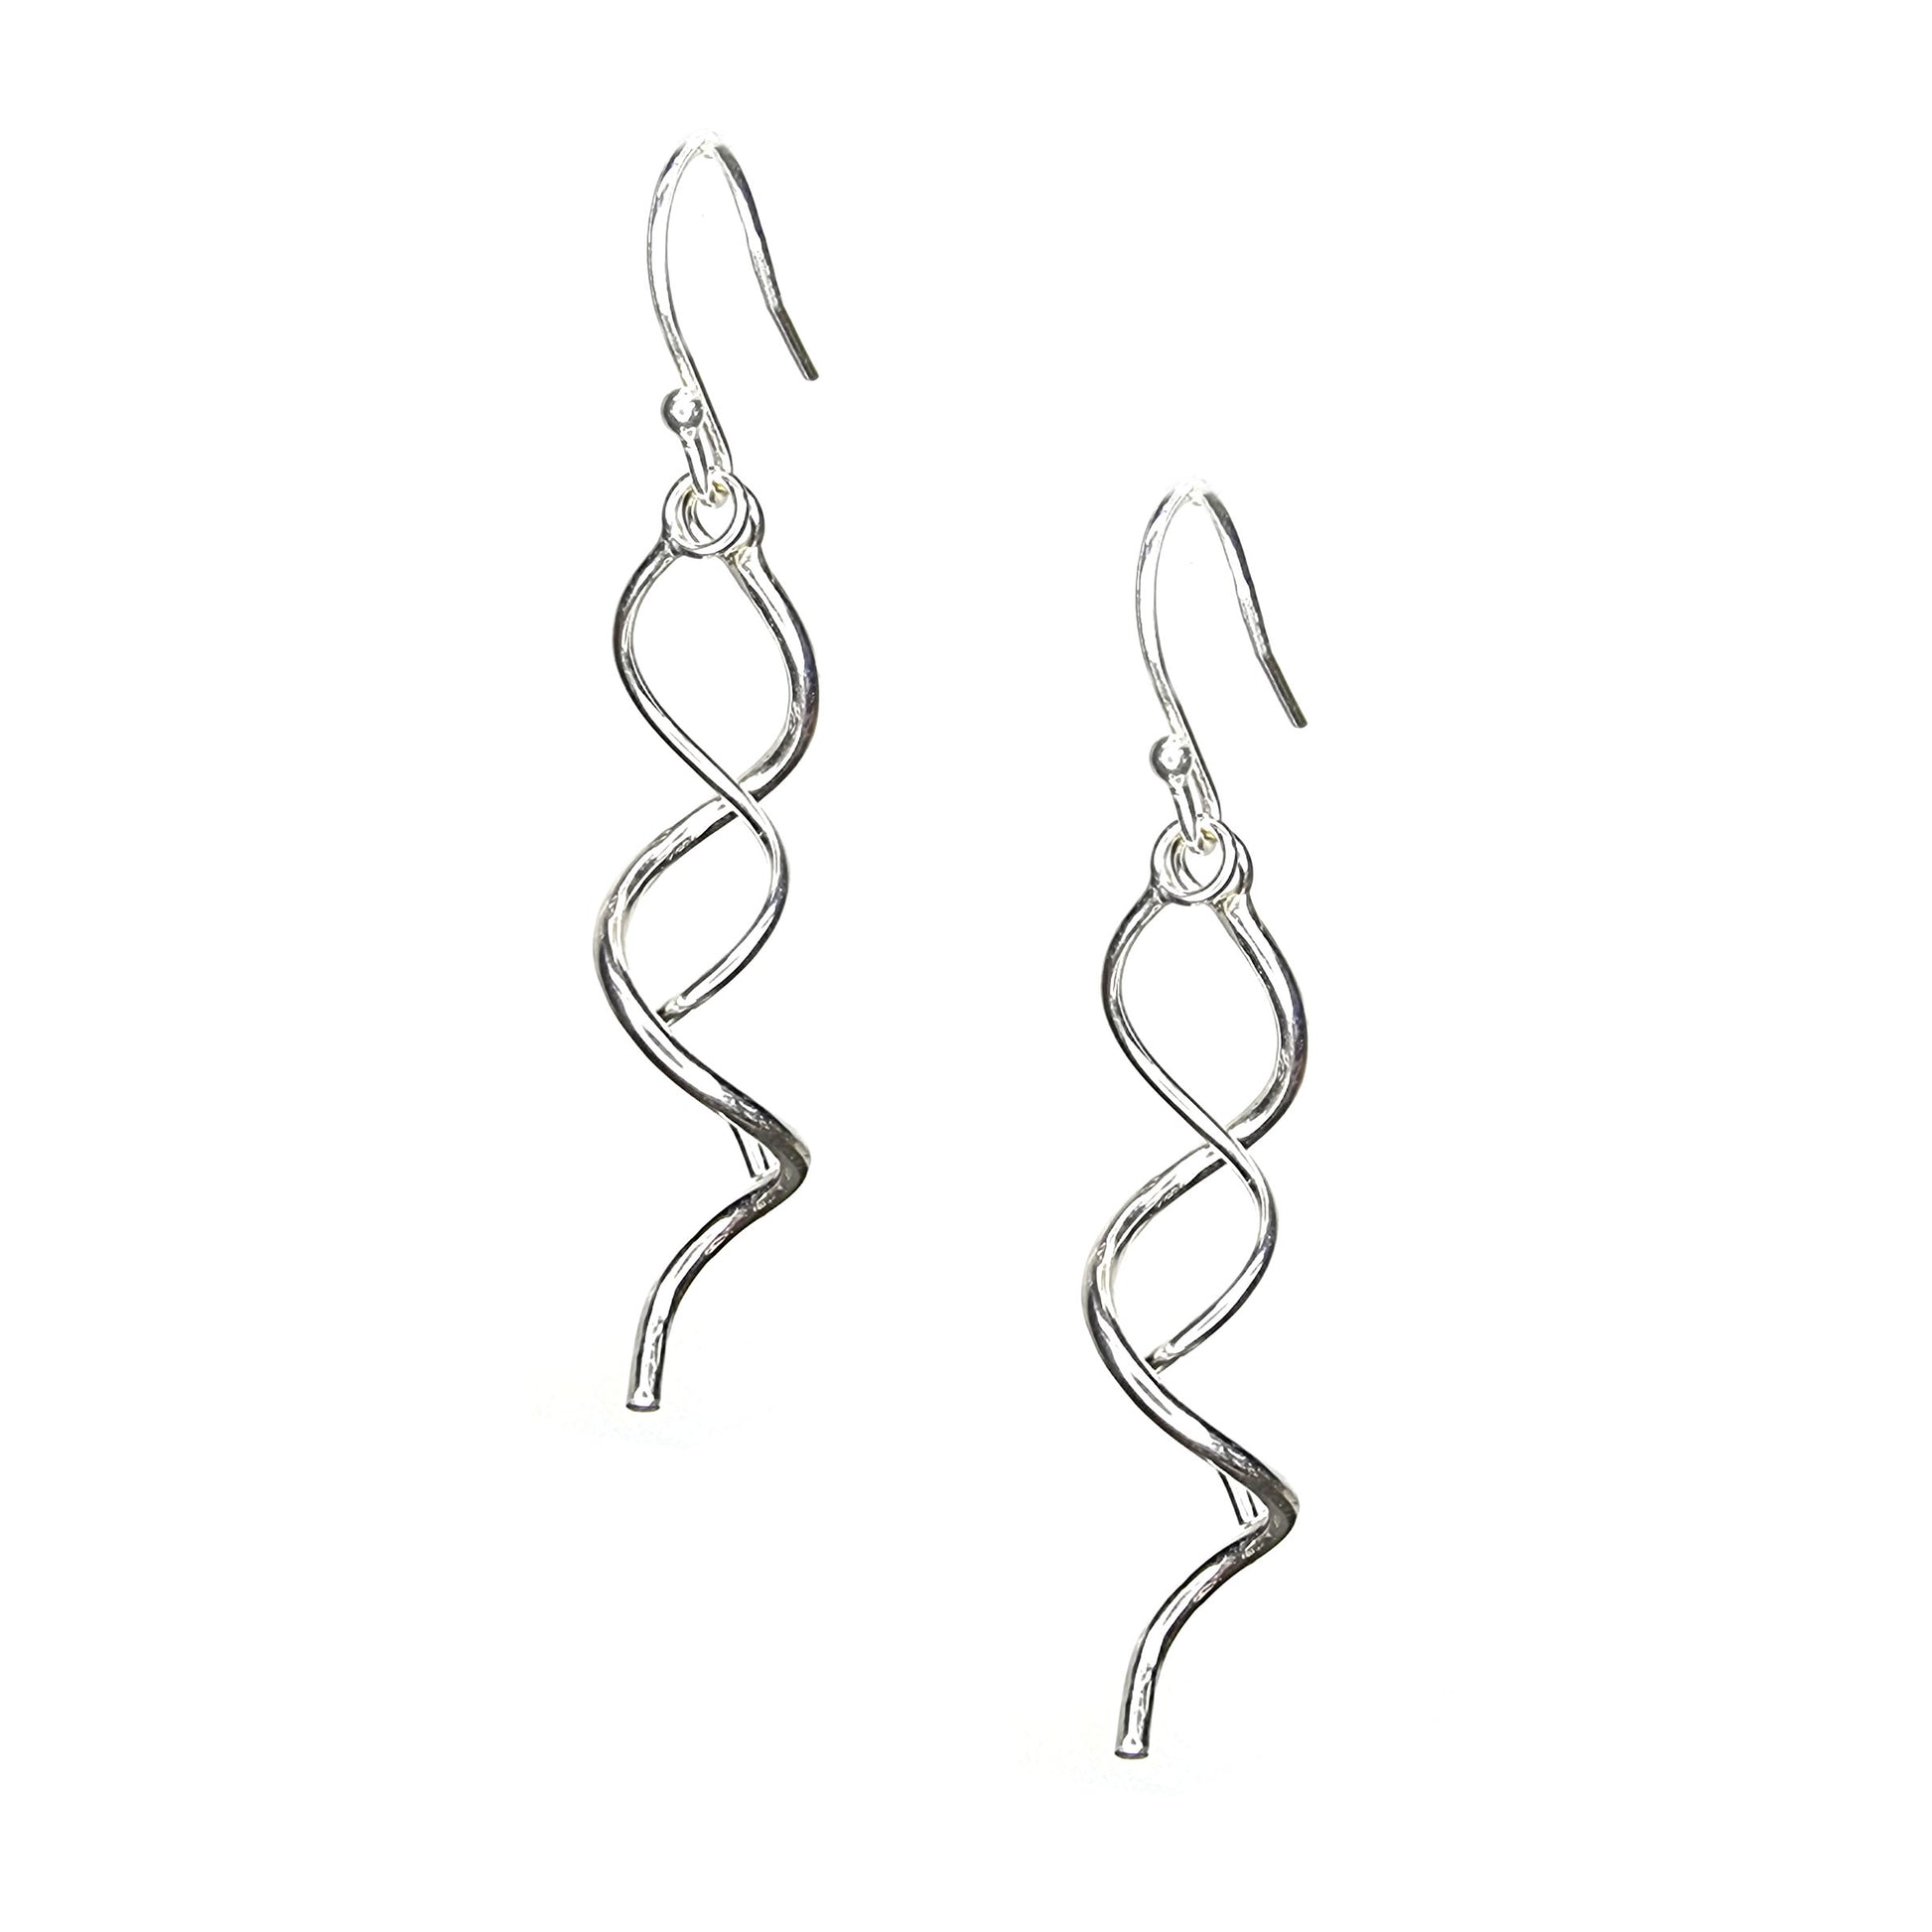 Silver twist drop earrings featuring 2 curled strands intertwined.